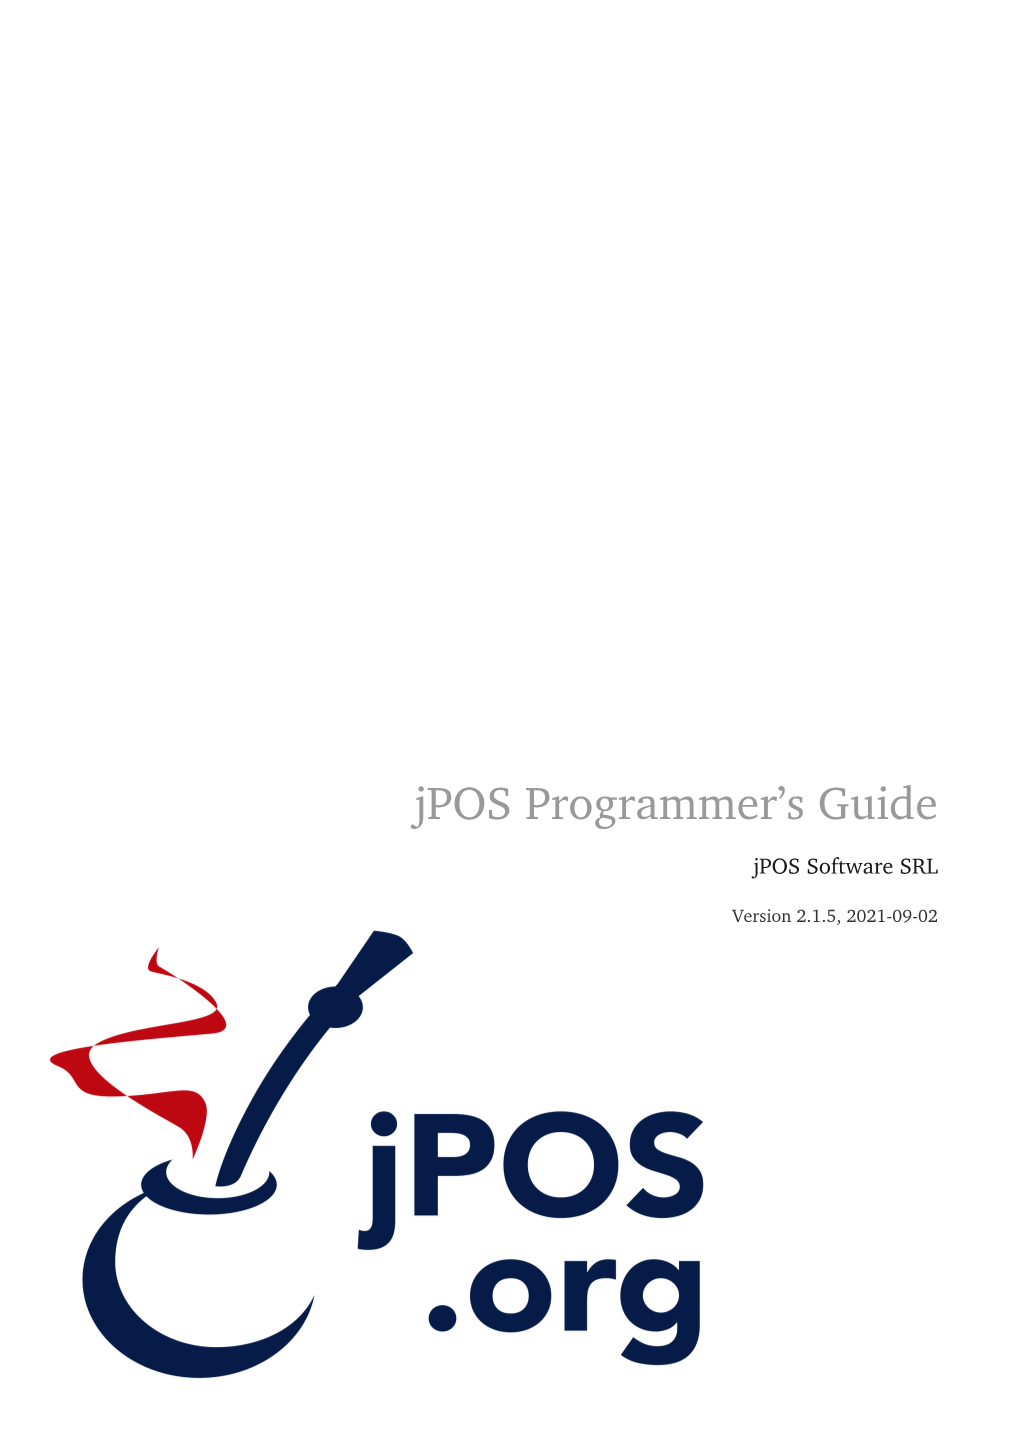 Jpos Programmer's Guide